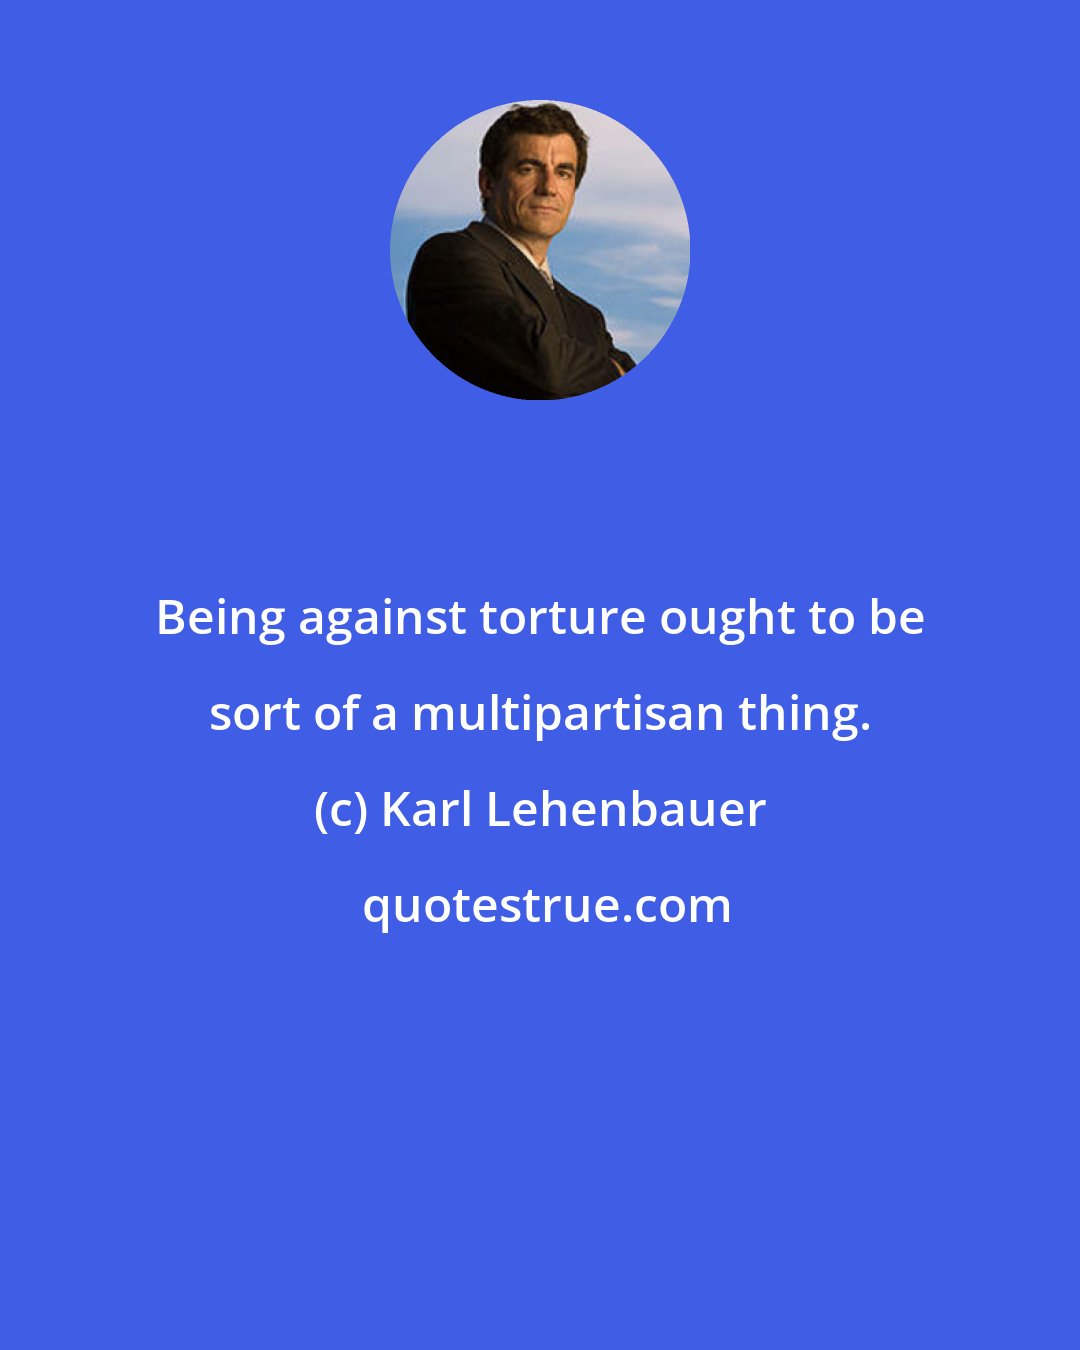 Karl Lehenbauer: Being against torture ought to be sort of a multipartisan thing.